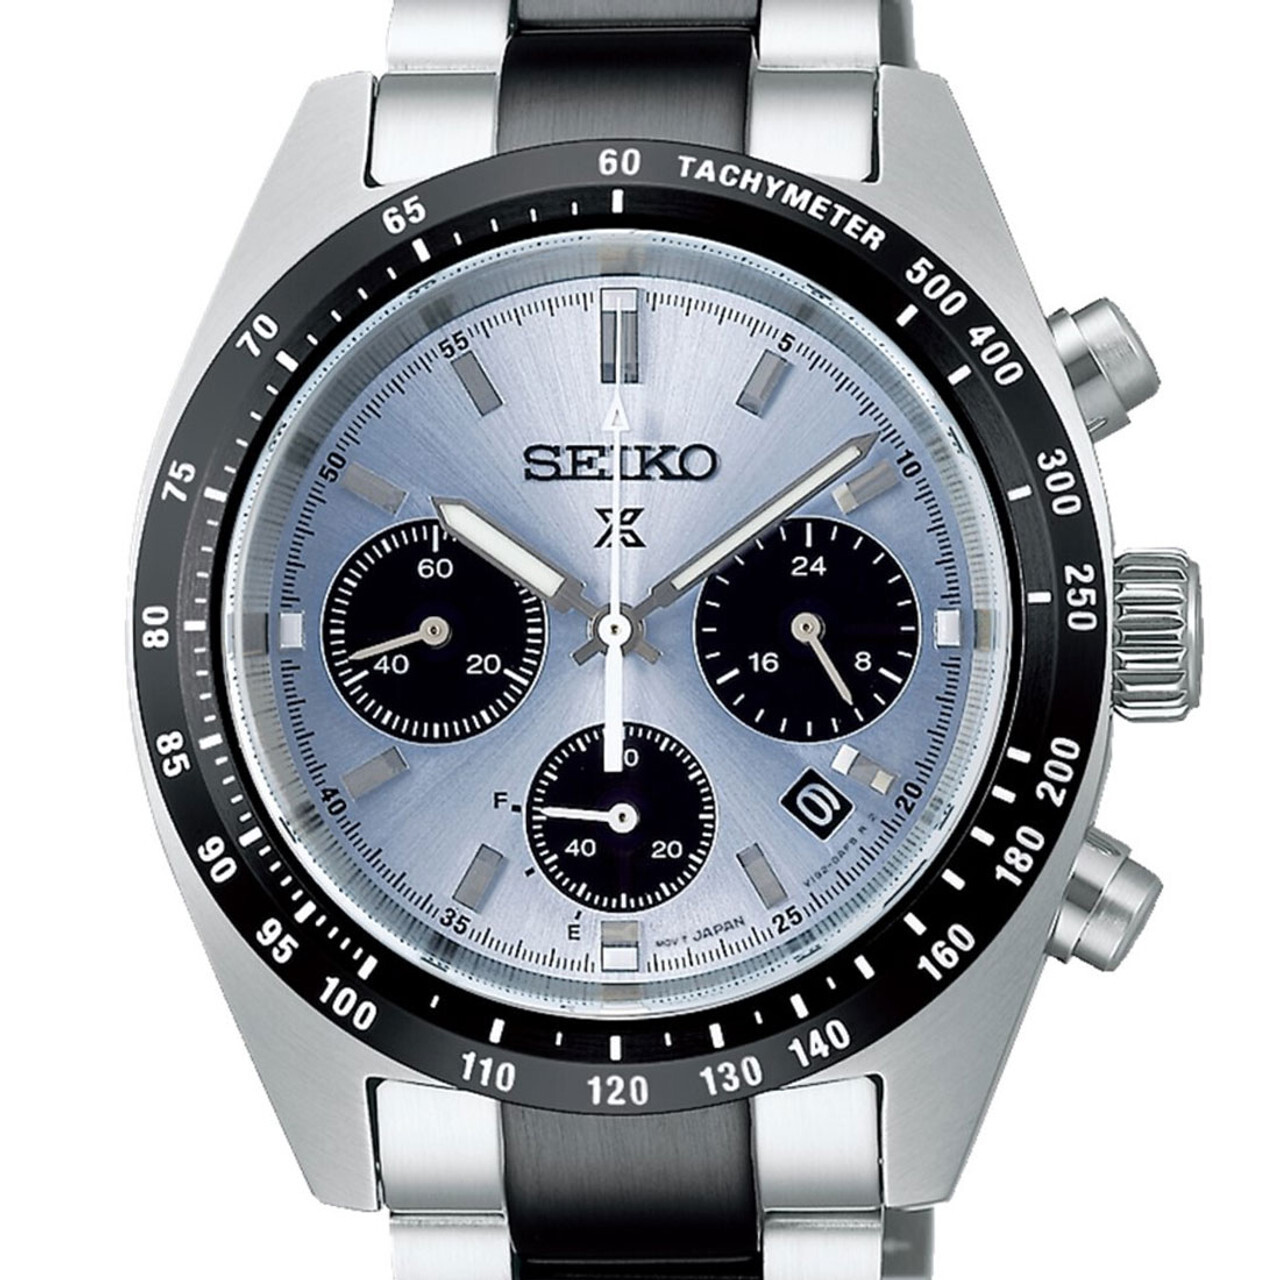 Seiko Prospex Solar SpeedTimer SSC909P1 "Crystal Trophy" Solar powered

Limited Edition 39mm curved Sapphire crystal 100m WR stainless steel

bracelet